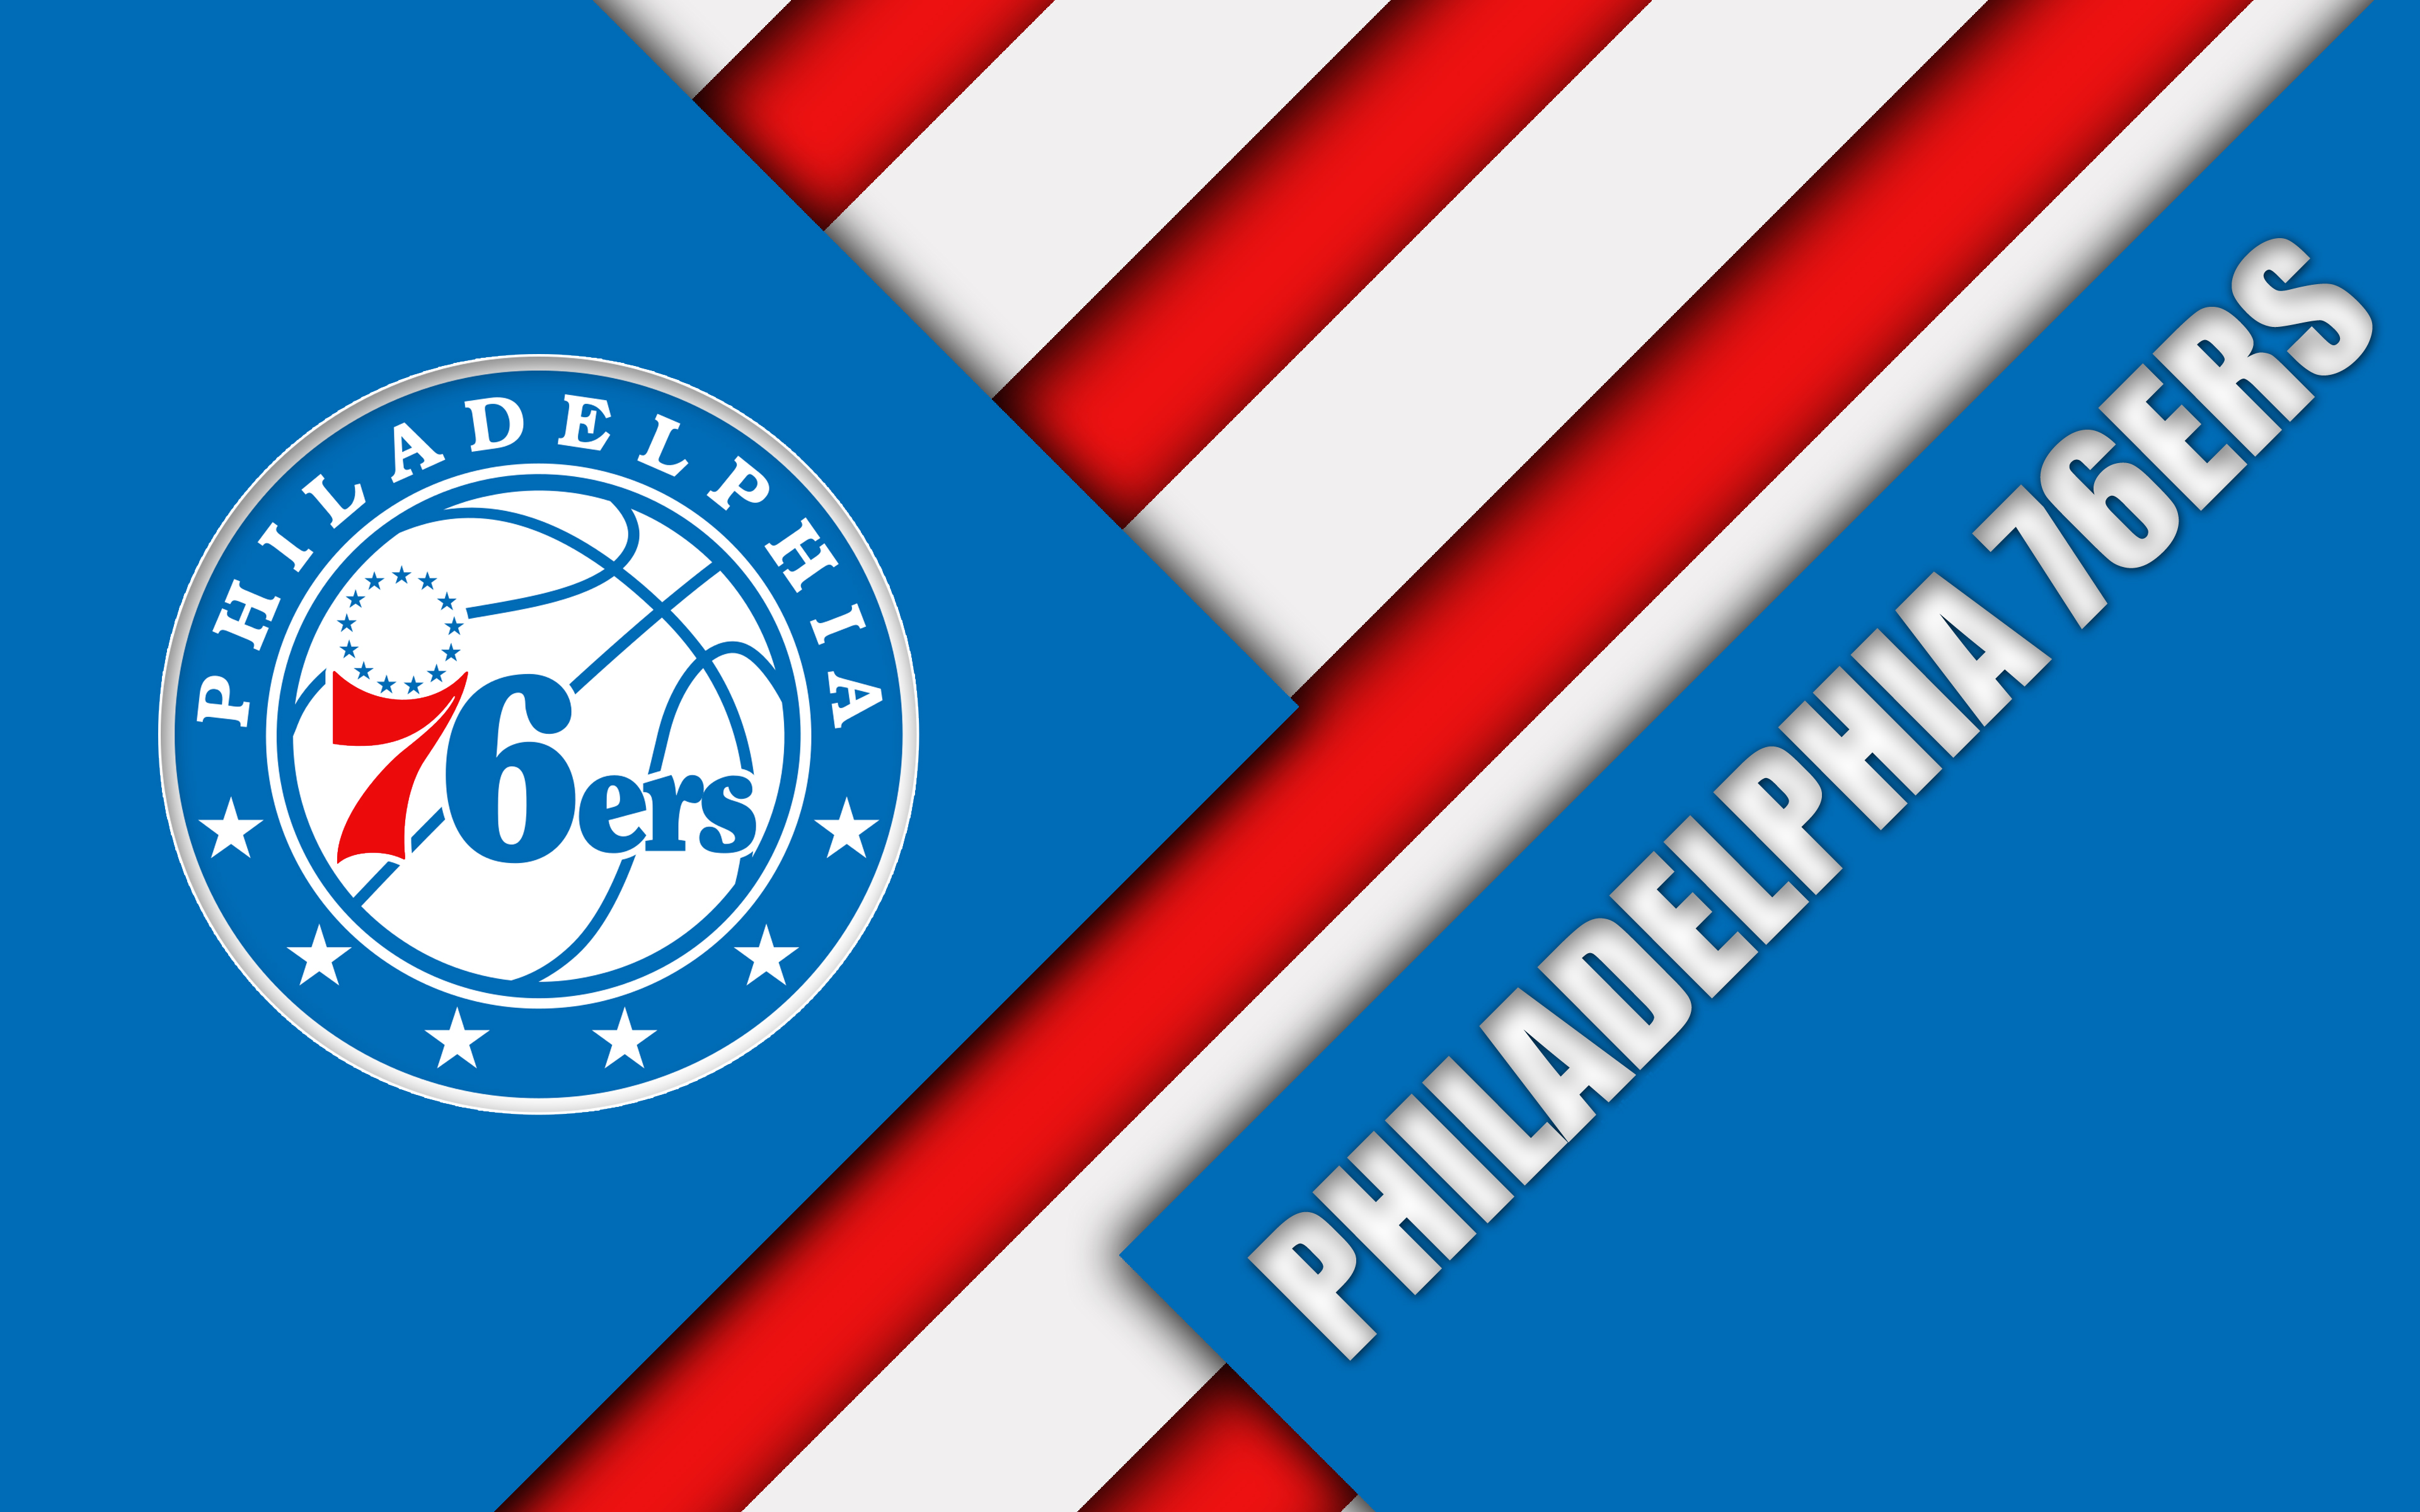 Download wallpaper Philadelphia 76ers, 4k, logo, material design, American basketball club, red blue abstraction, NBA, Philadelphia, Pennsylvania, USA, basketball for desktop with resolution 3840x2400. High Quality HD picture wallpaper